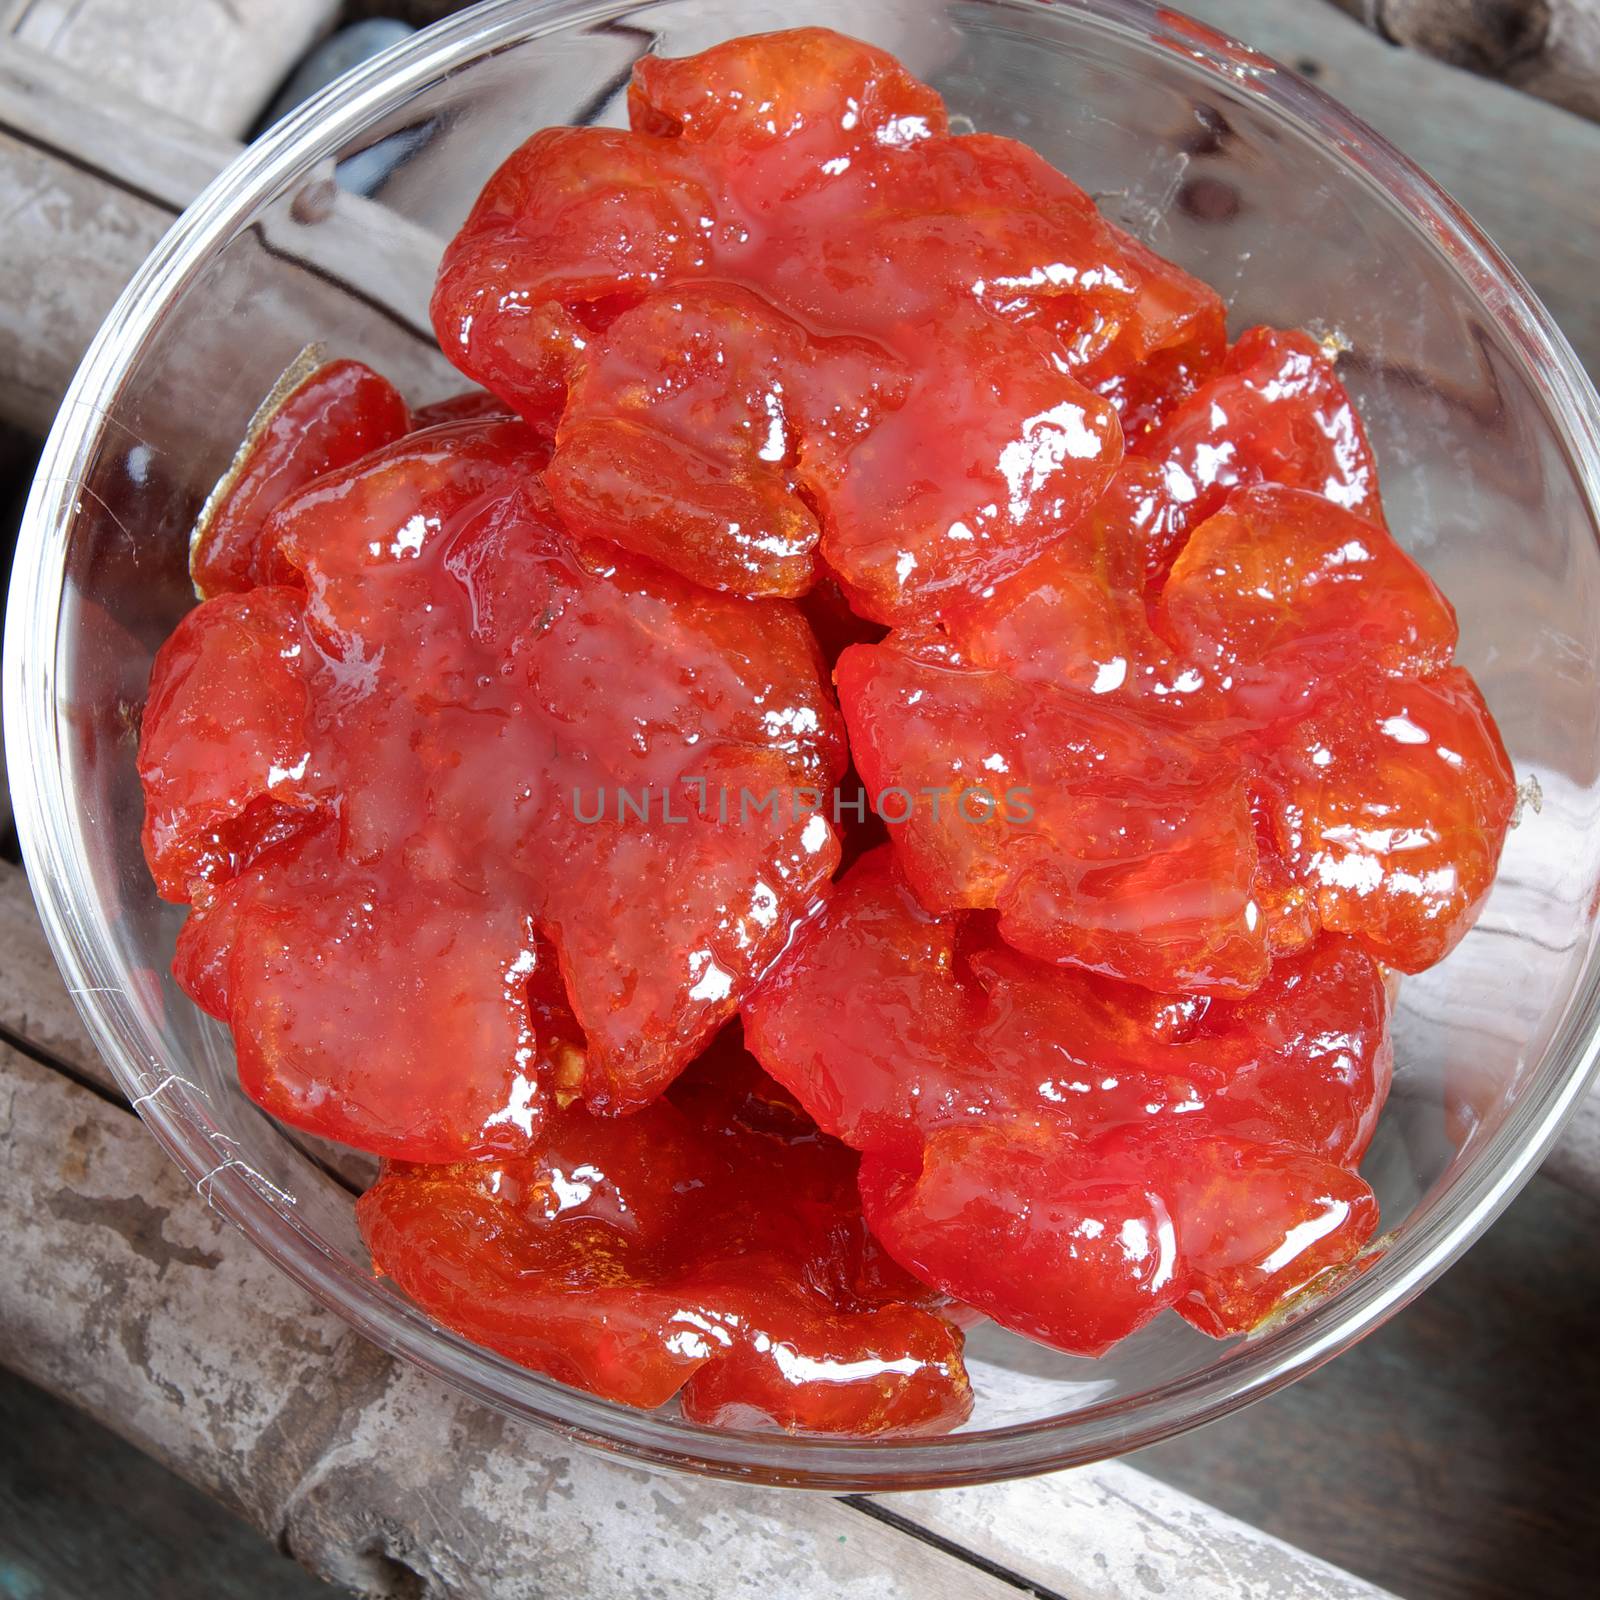 Vietnamese food for Tet holiday in spring, tomato jam, sweet eating is traditional food on lunar new year, can make from tomato cook with sugar,  amazing background for Vietnam custom